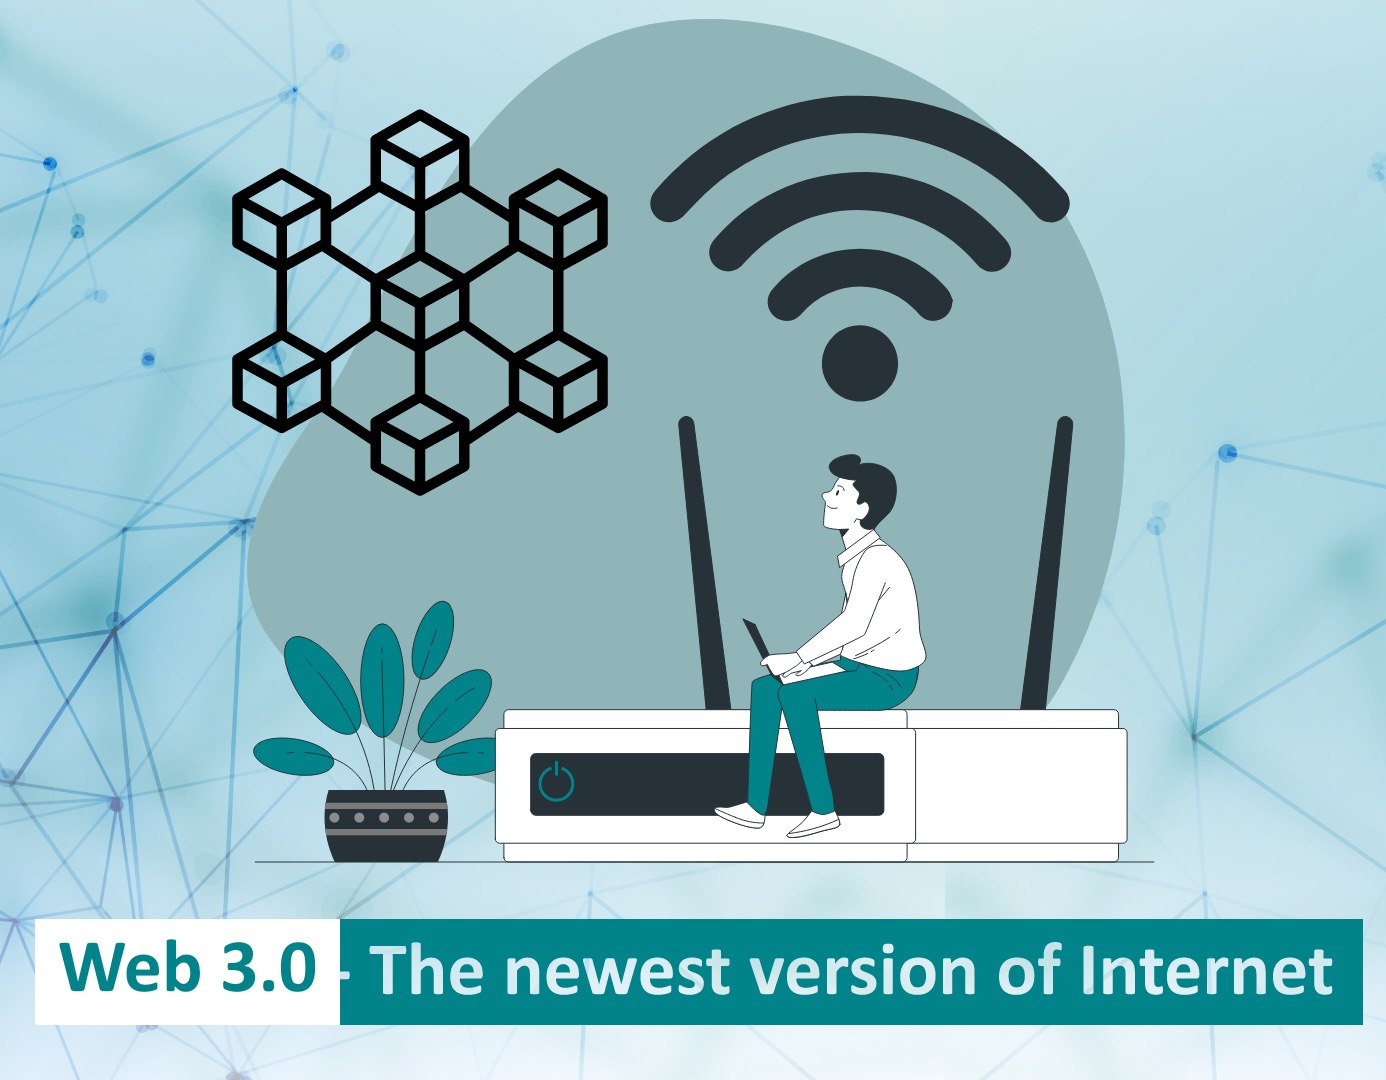 Web 3.0 - The newest version of Internet